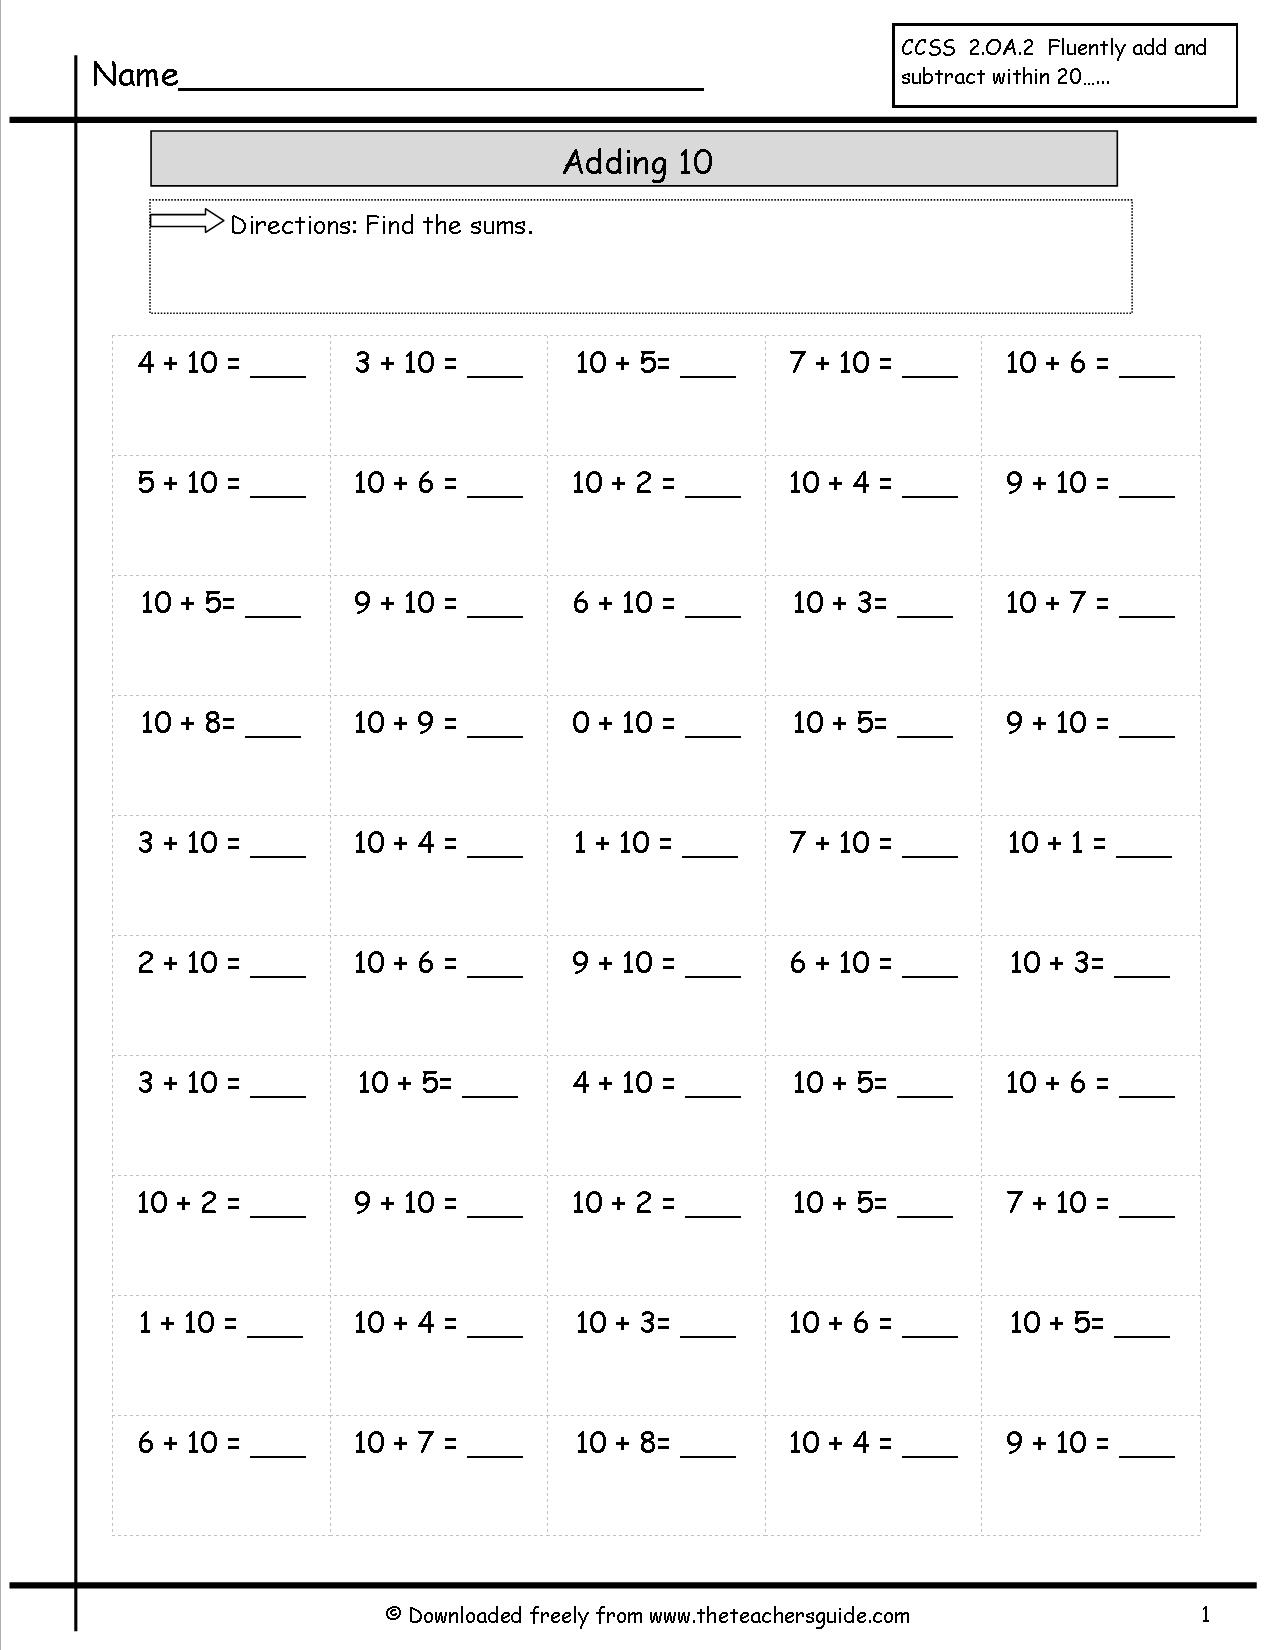 Adding 10 To A Number Worksheet